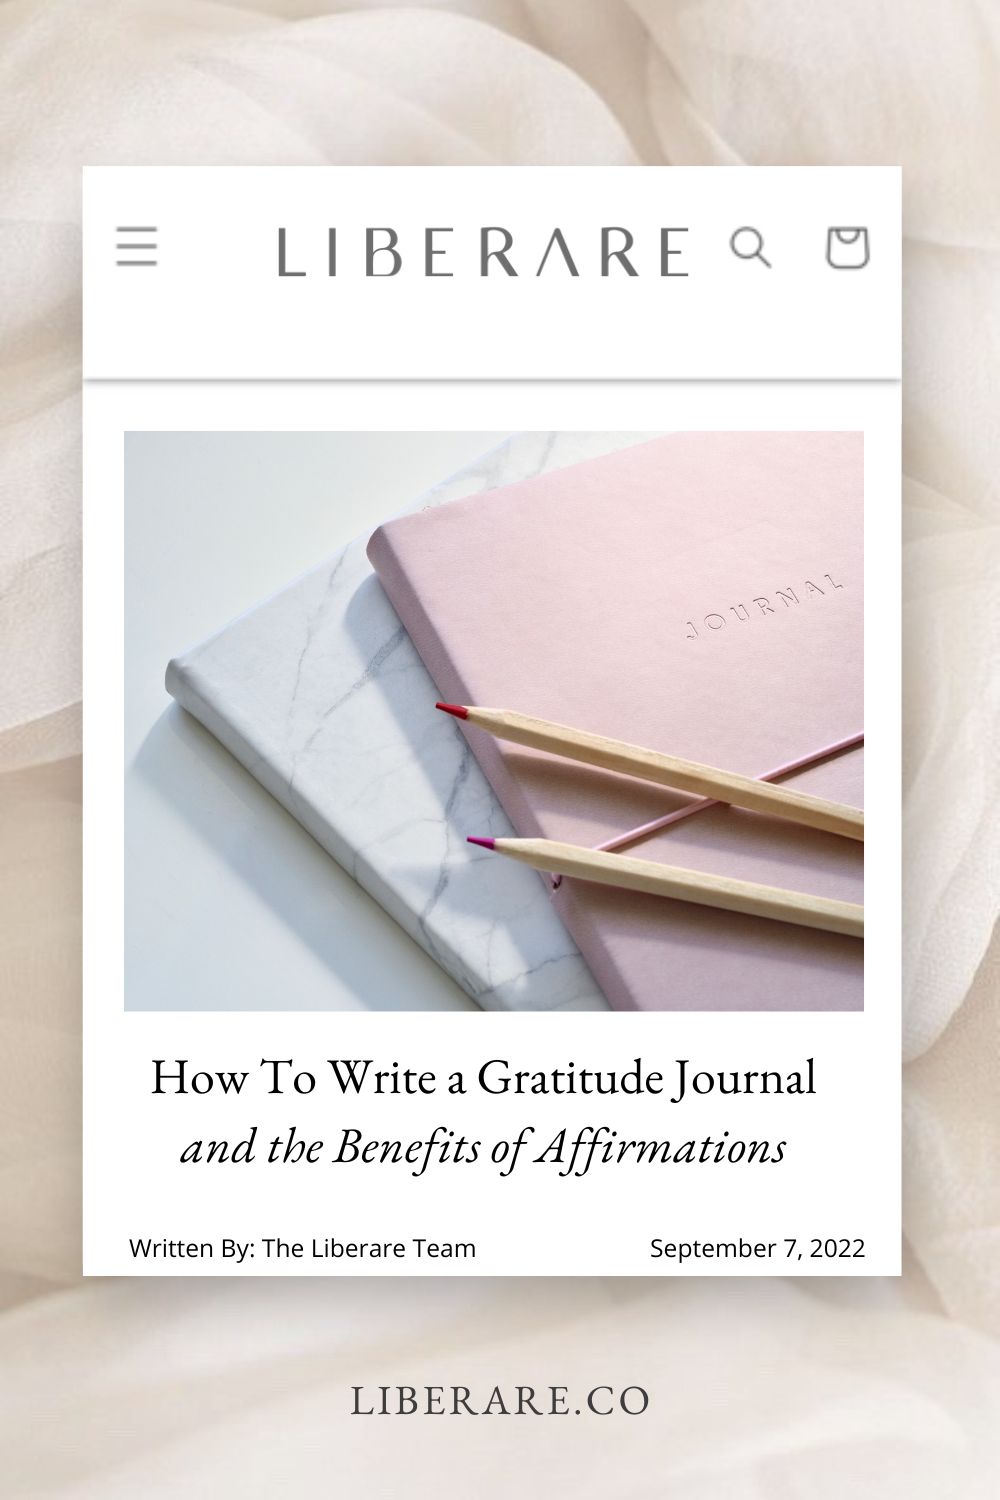 How To Write a Gratitude Journal and the Benefits of Affirmations